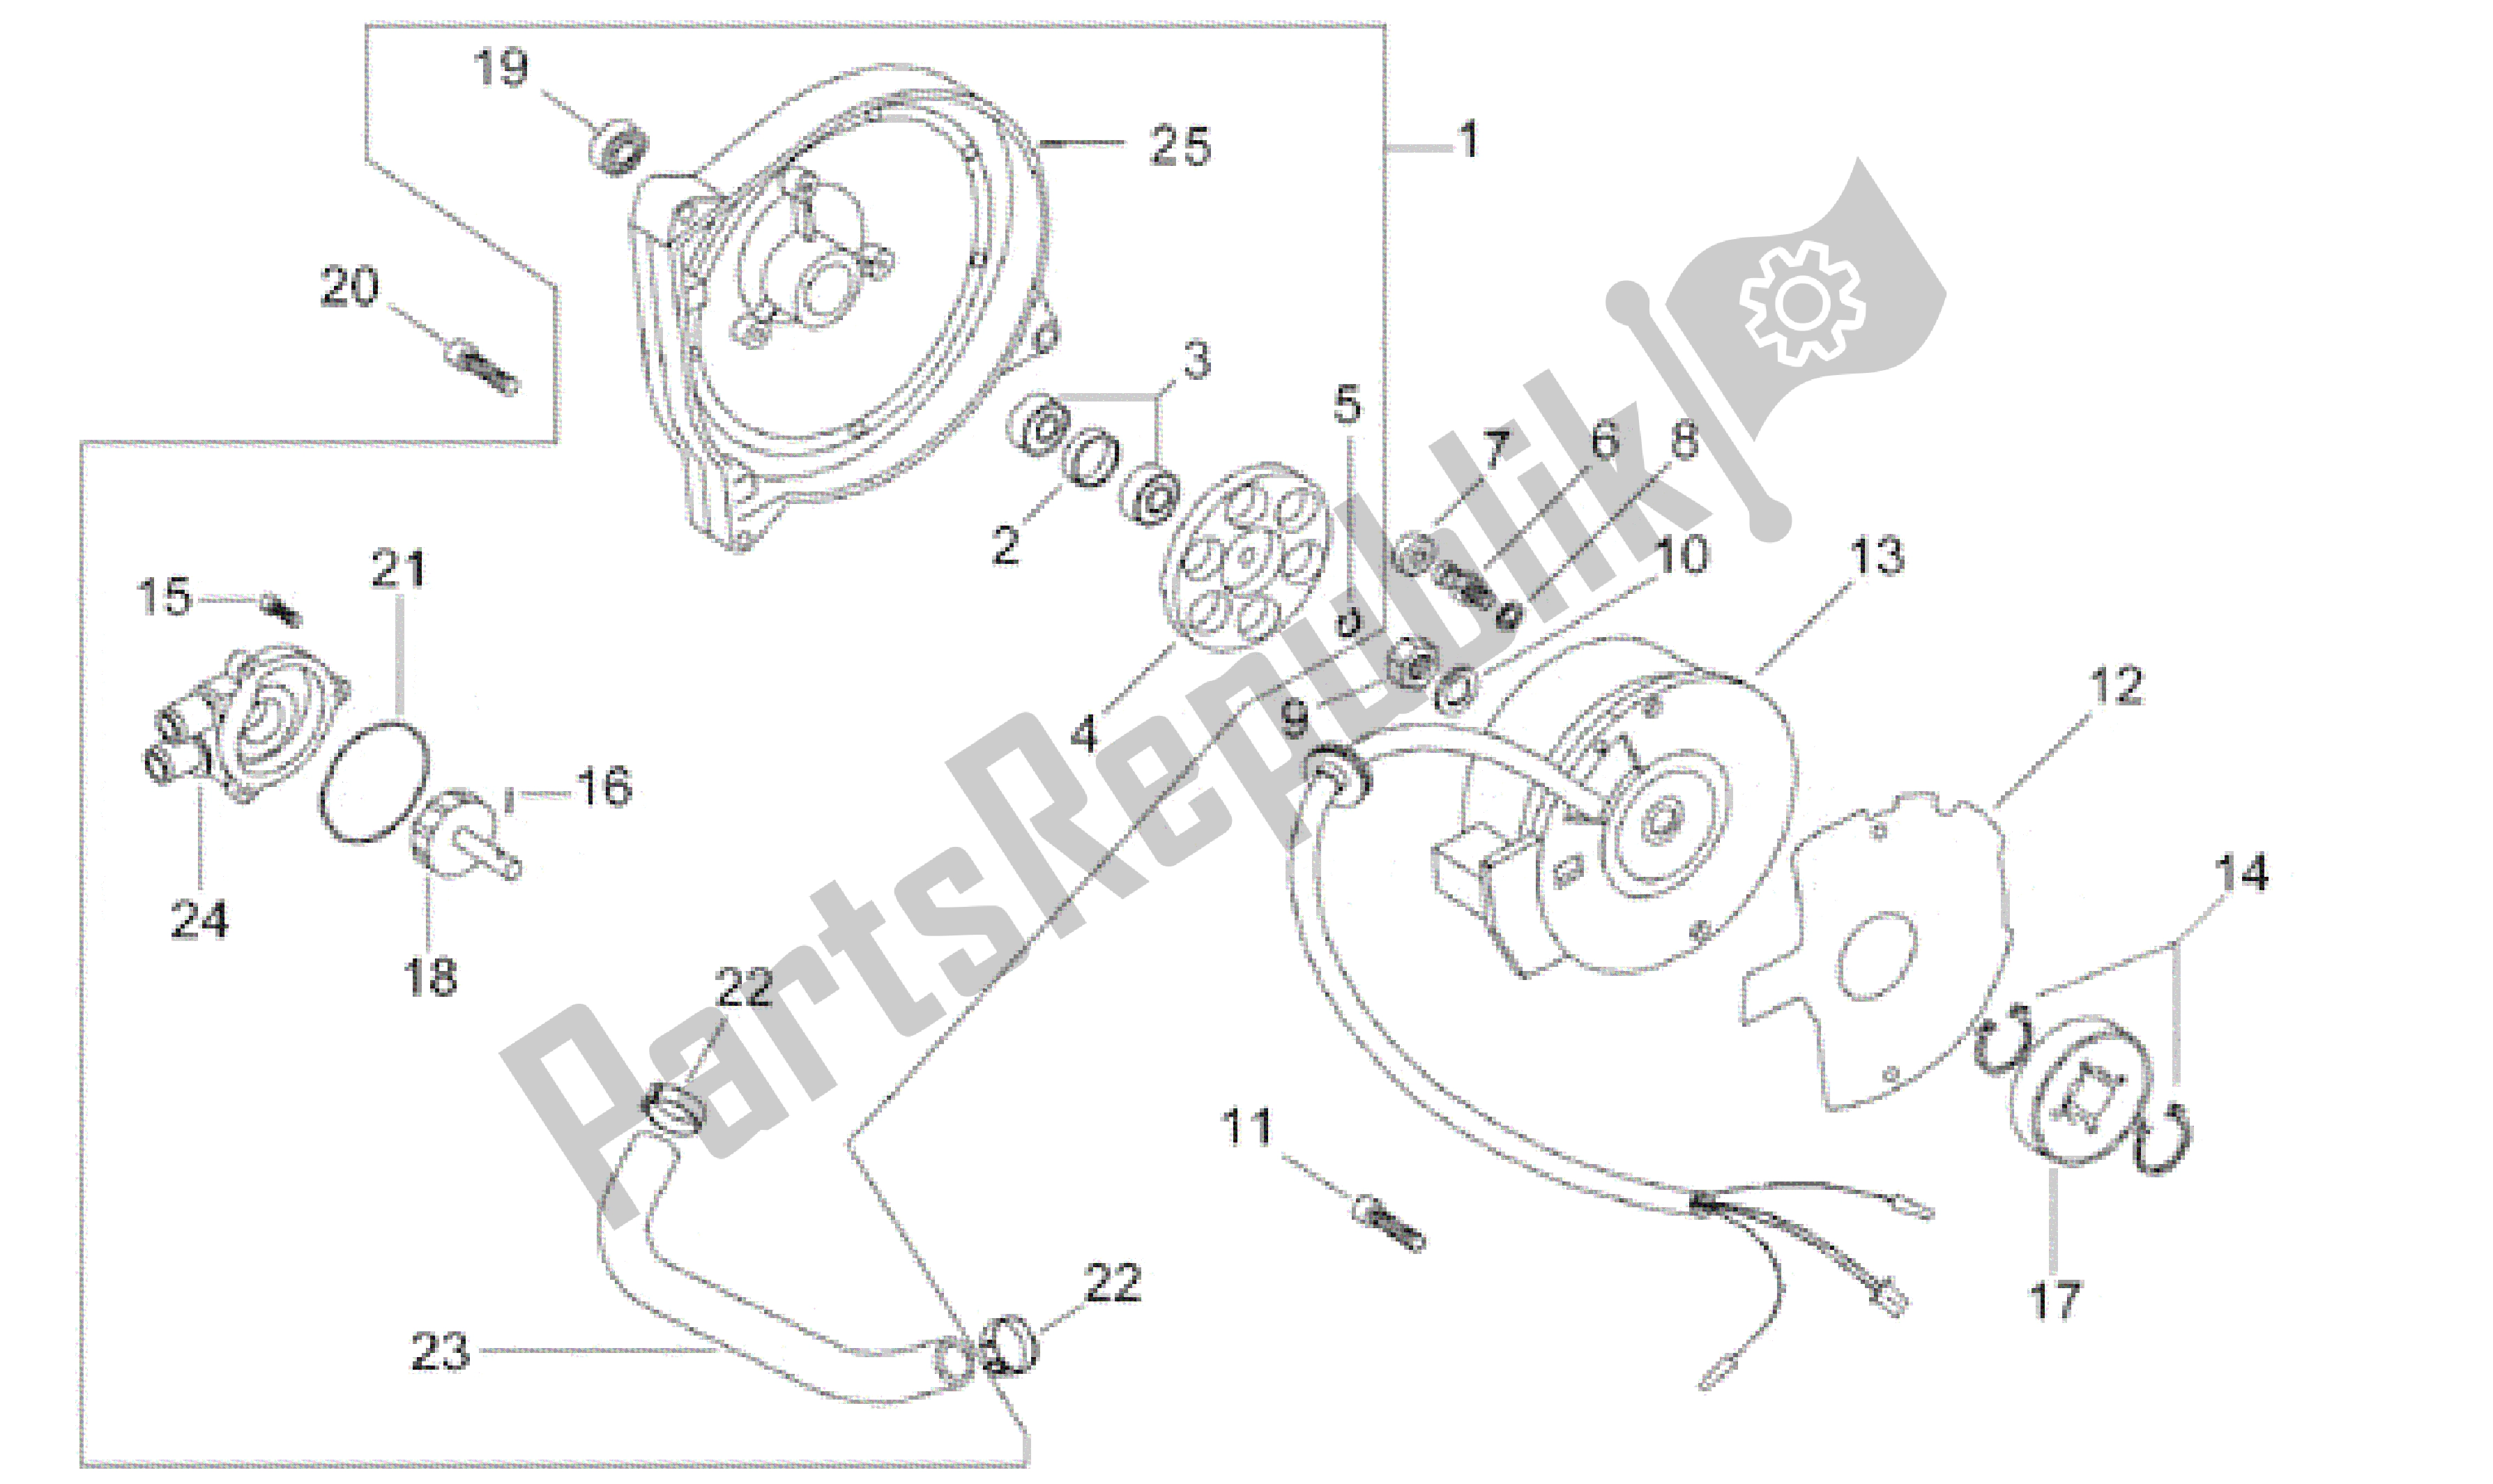 All parts for the Flywheel - Water Pump of the Aprilia Area 51 50 1998 - 2000